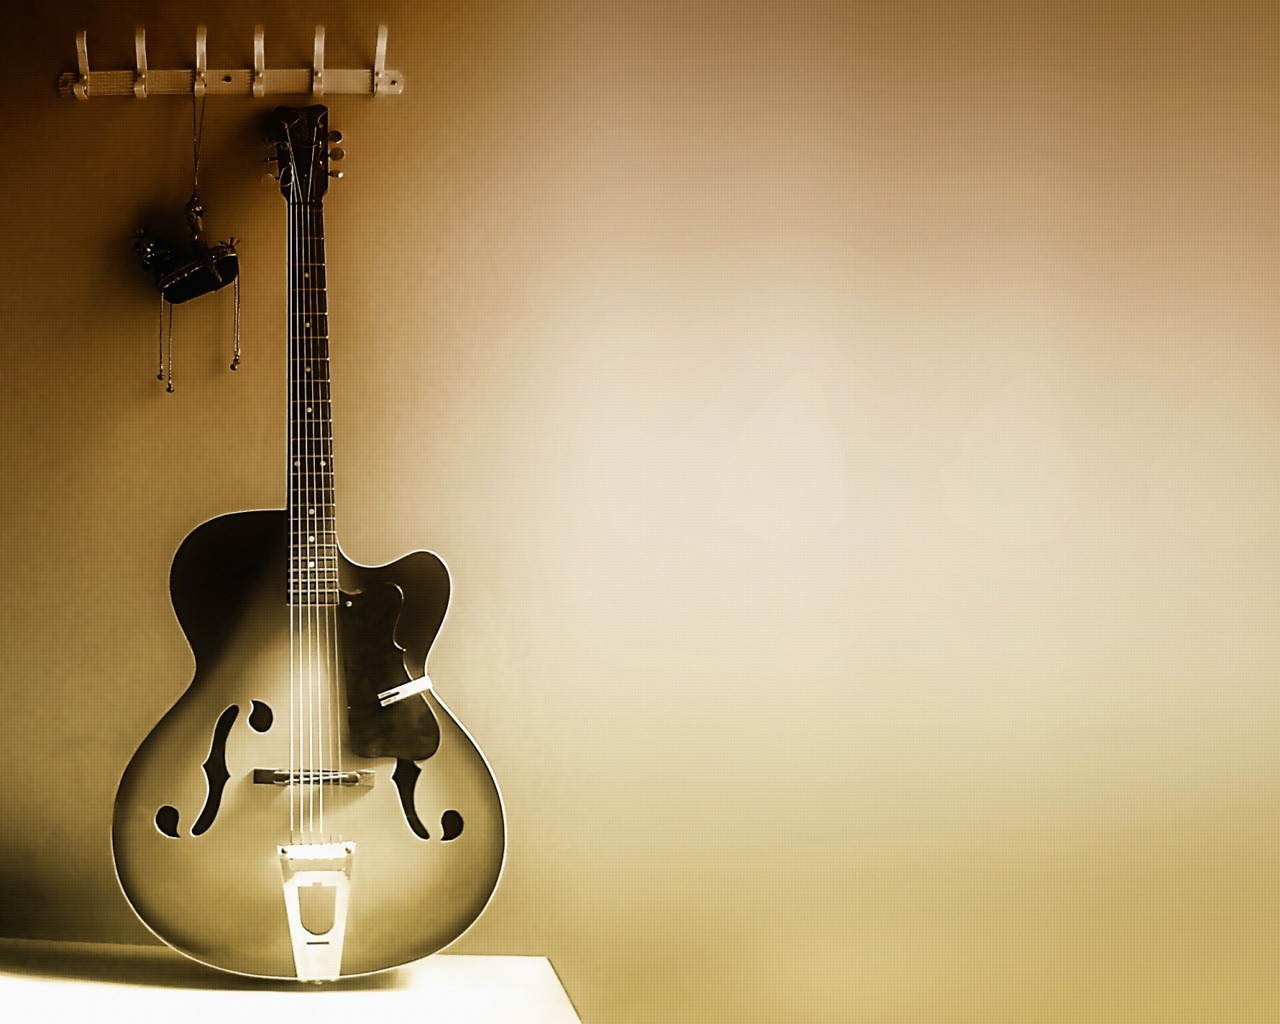 Solitary Guitar for 1280 x 1024 resolution